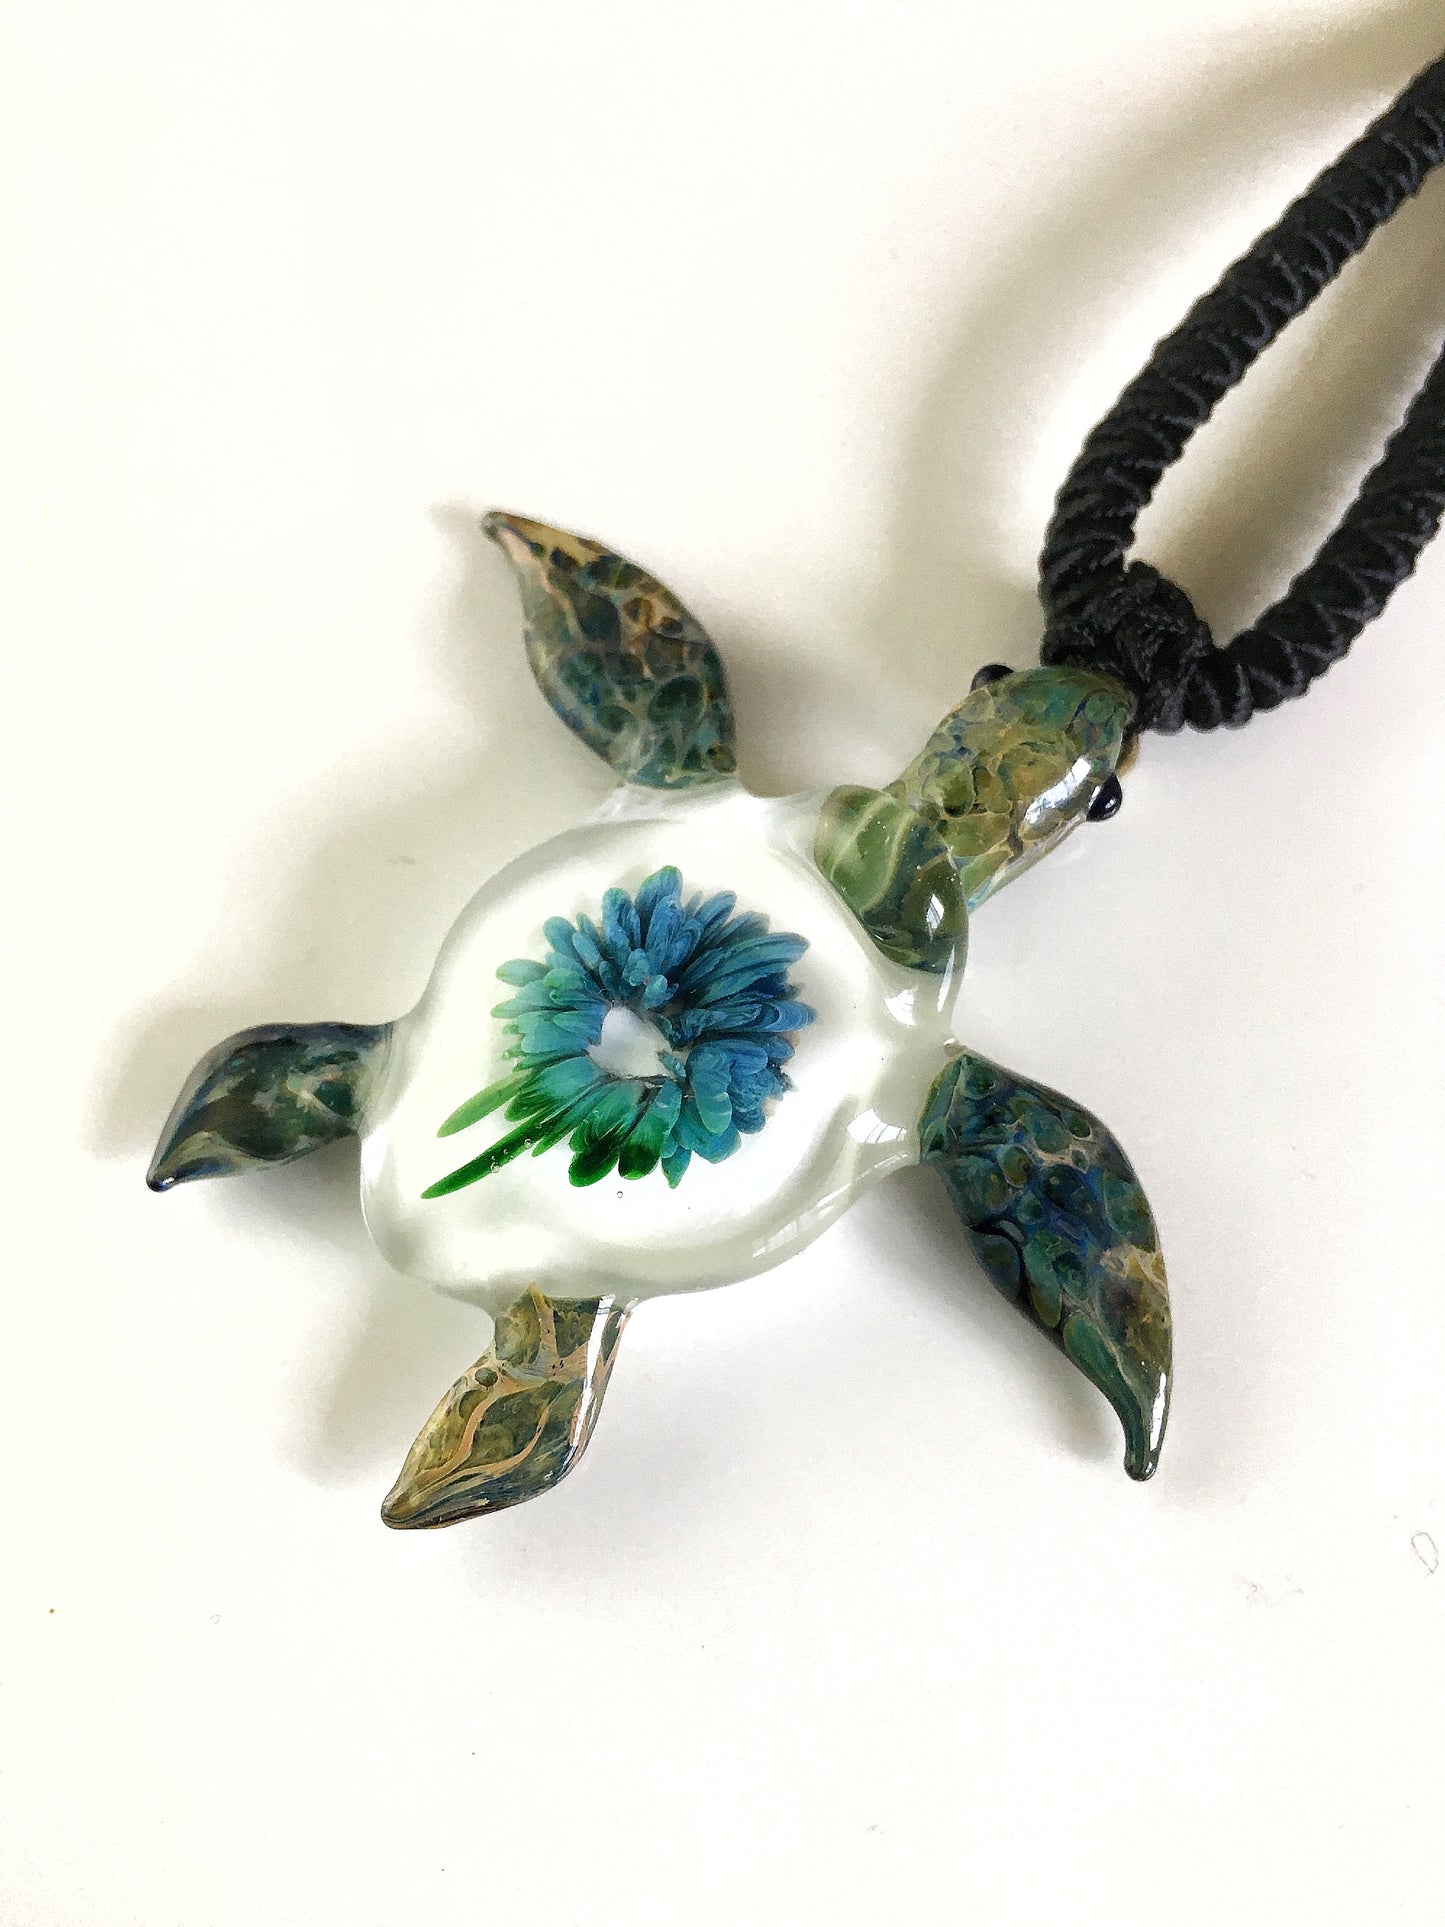 "Great Barrier Reef Honu Green Sea Turtle Pendant: Handcrafted Glass with Coral Reef Inside the Shell"